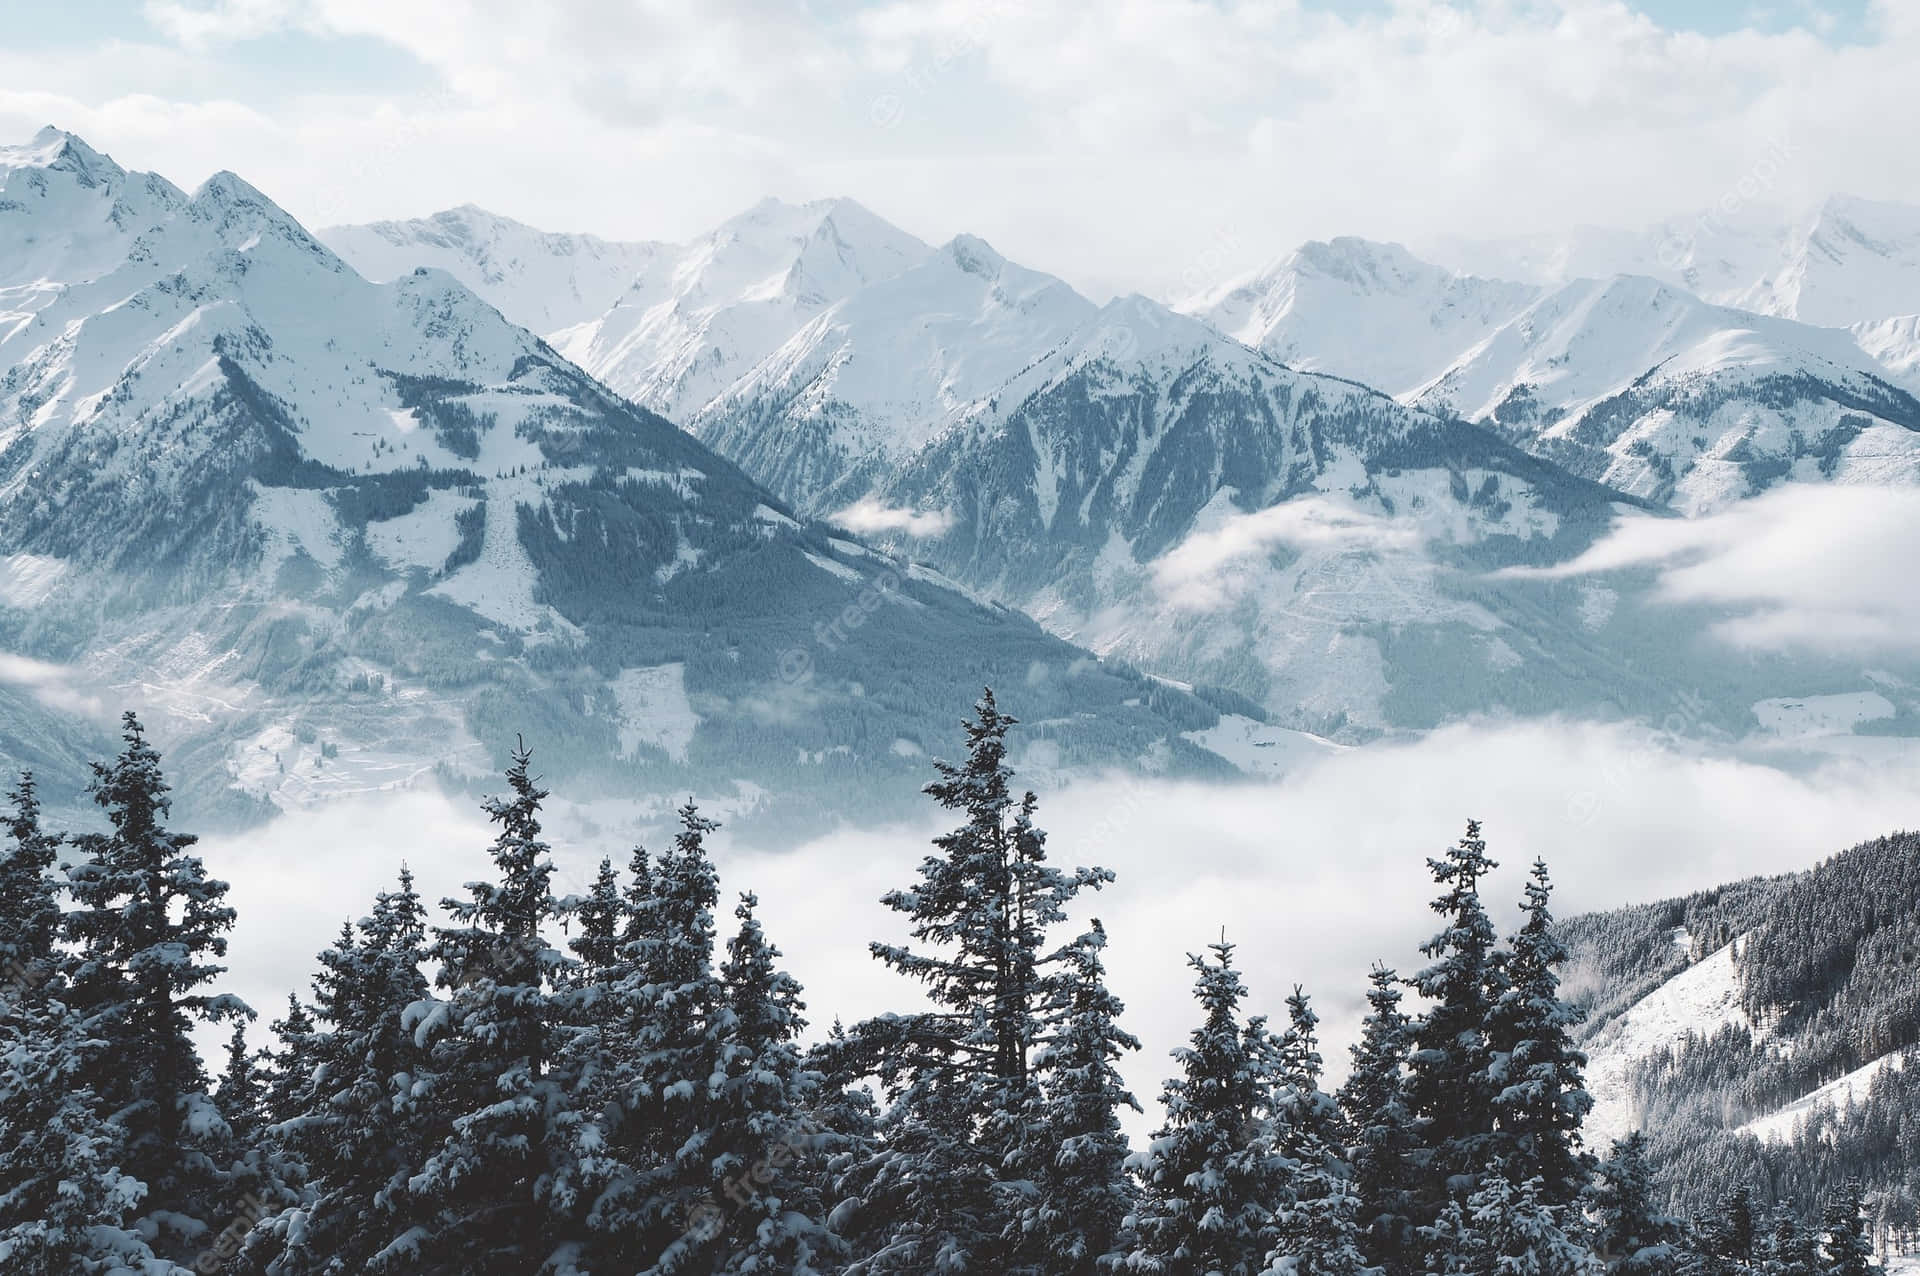 Download Snow capped mountain in beautiful scenery. | Wallpapers.com